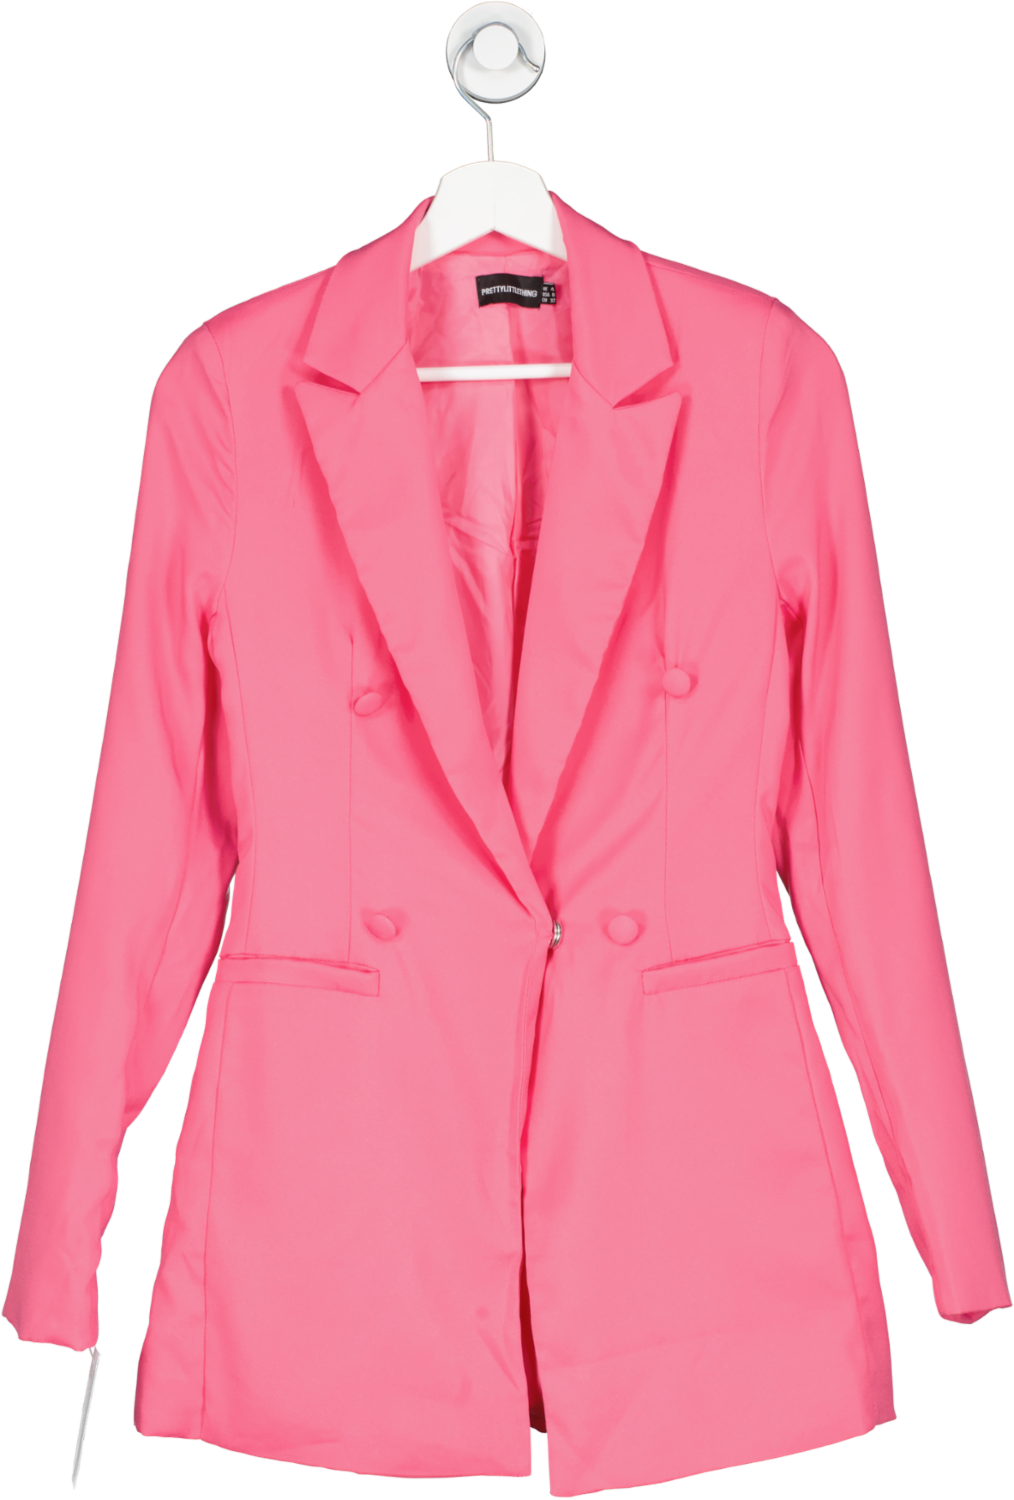 PrettyLittleThing Pink Double Breasted Woven Blazer UK 4